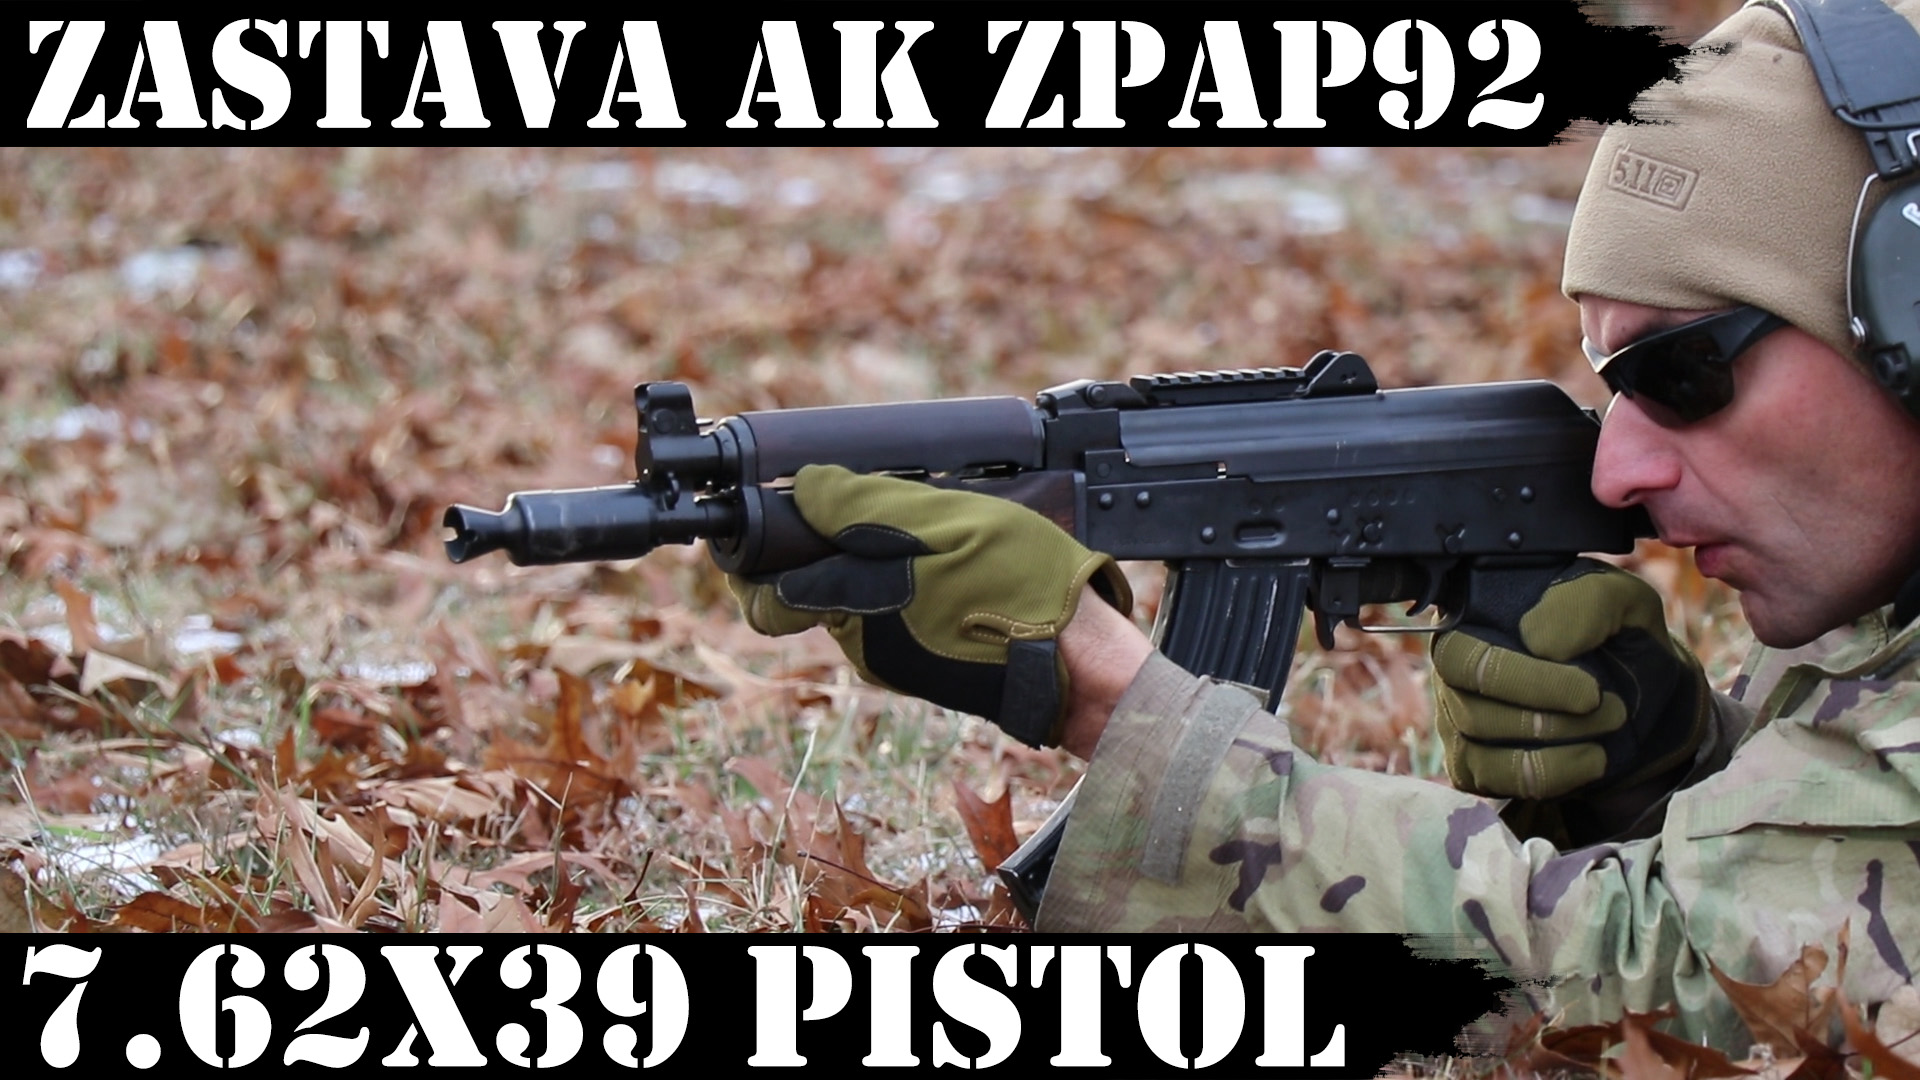 Zastava USA released new version of ZPAP92, this one is with SB brace out o...